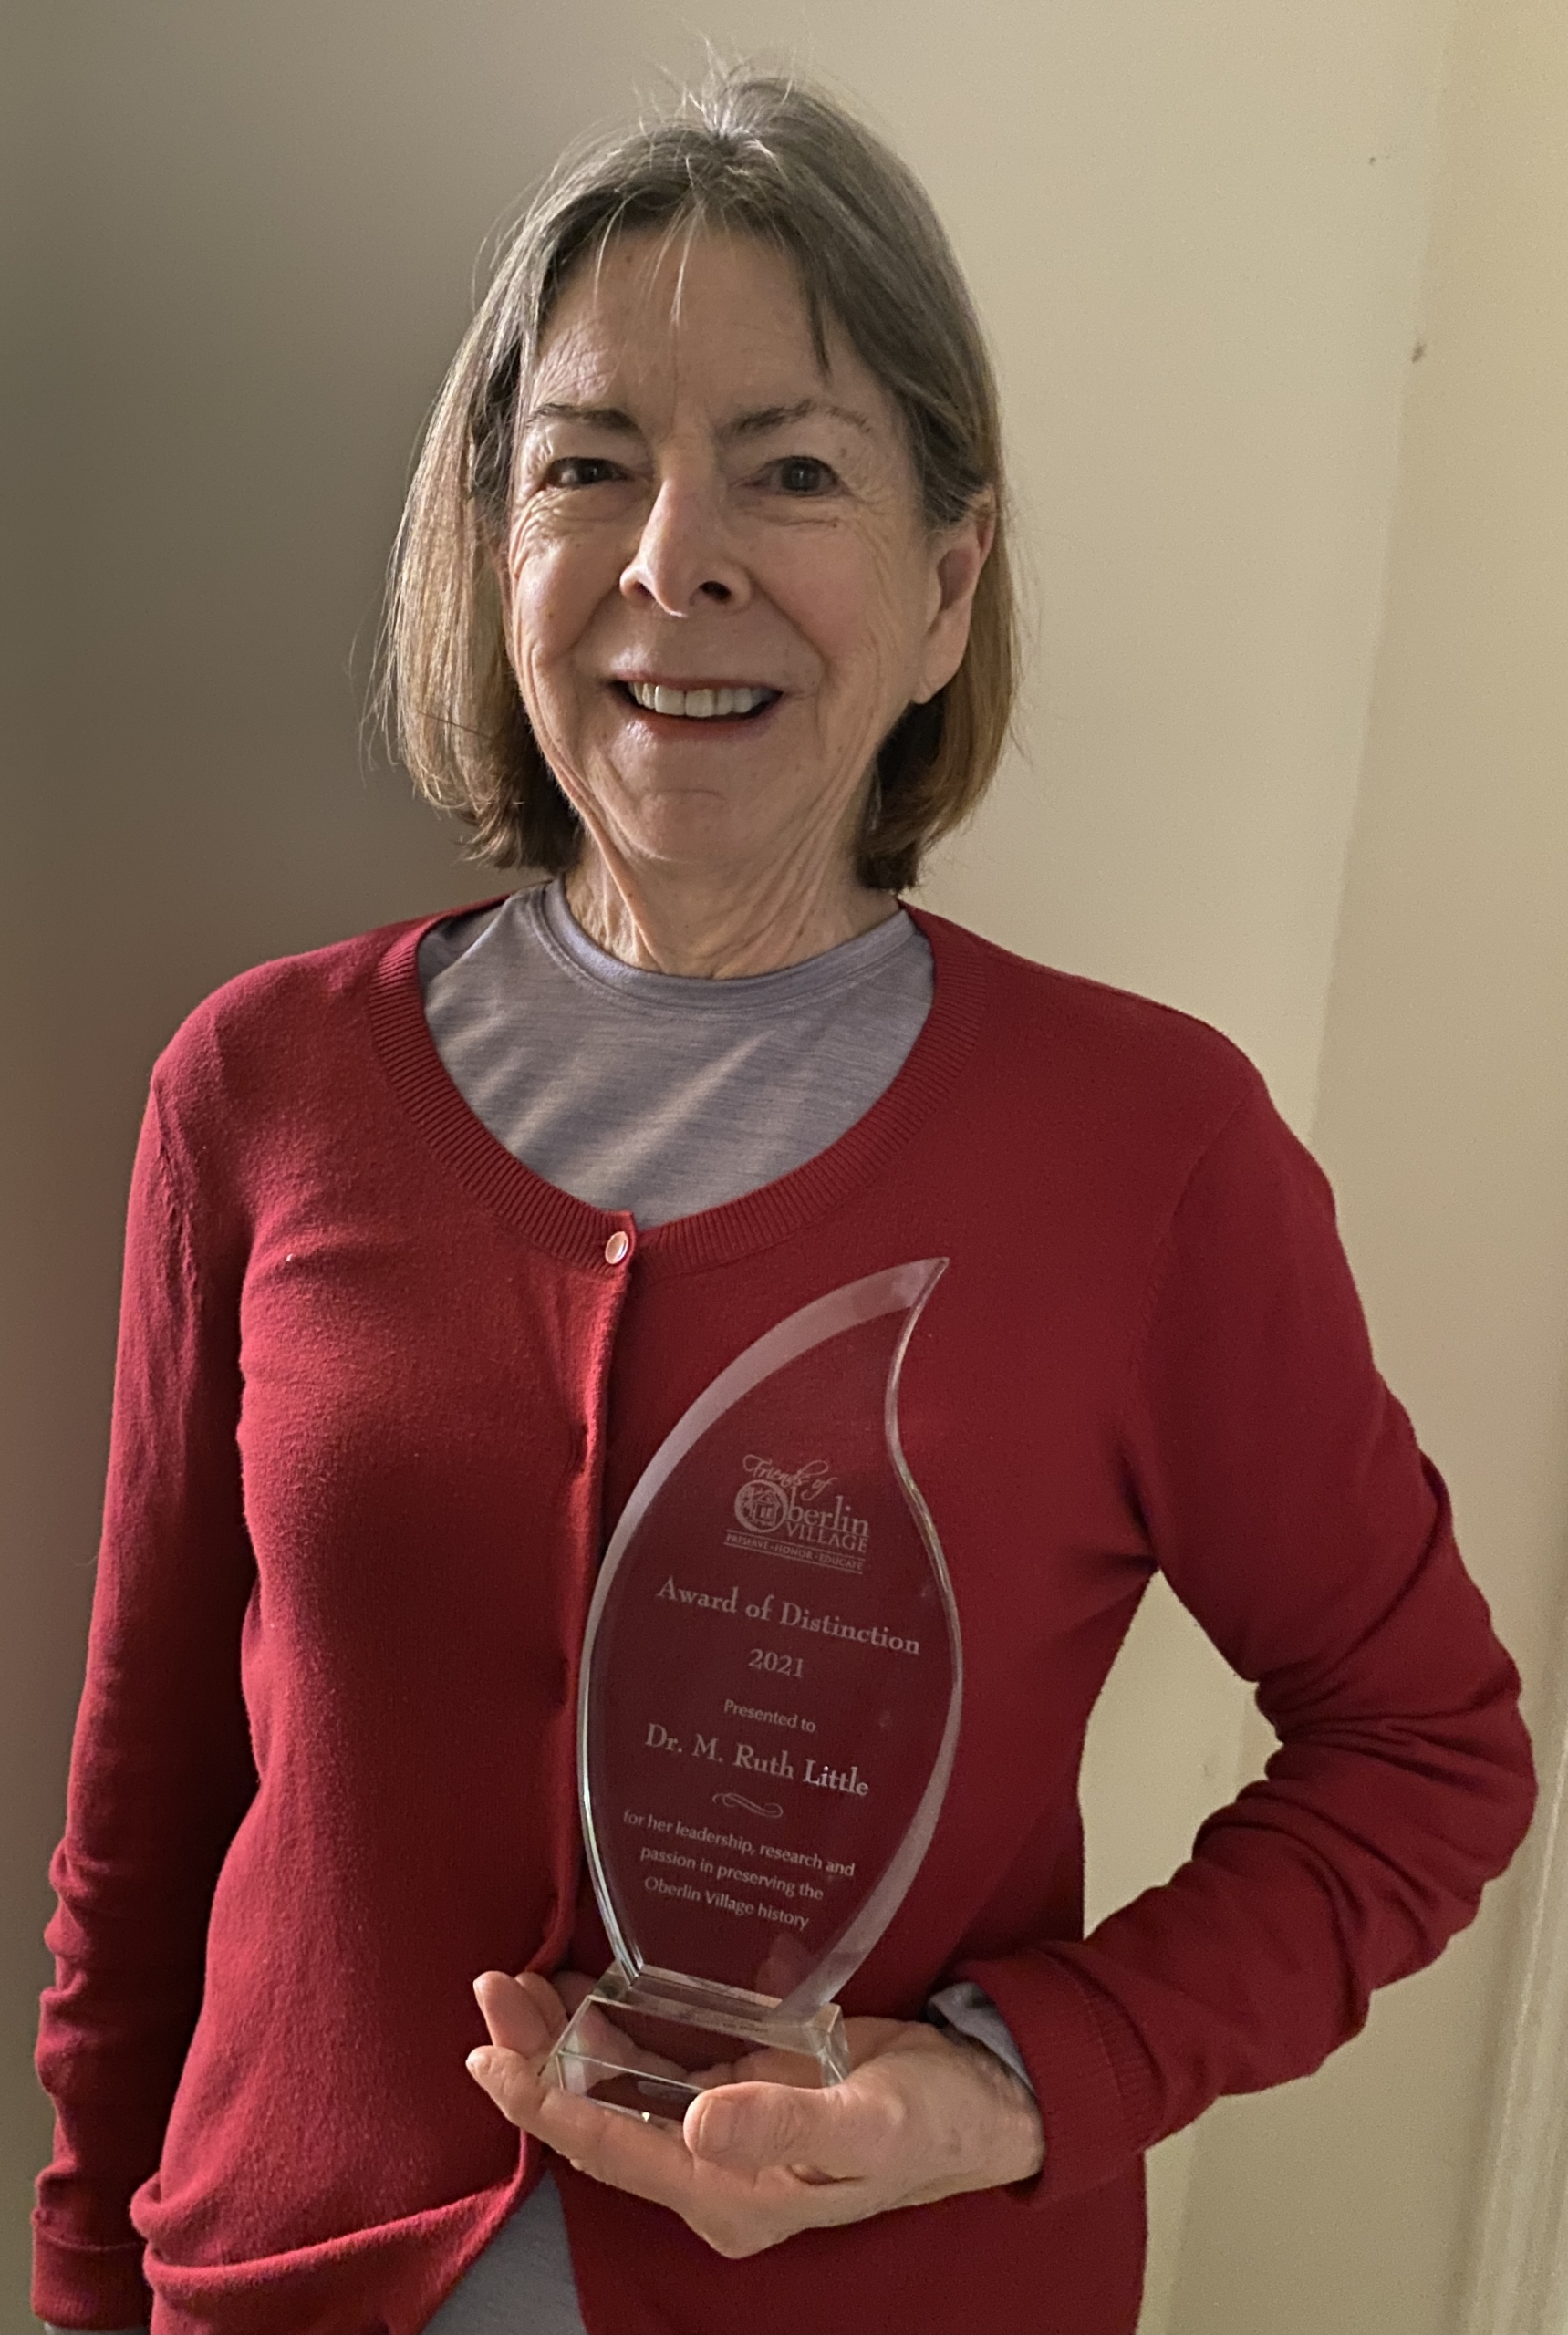 Ruth Little wearing a red sweater holding award